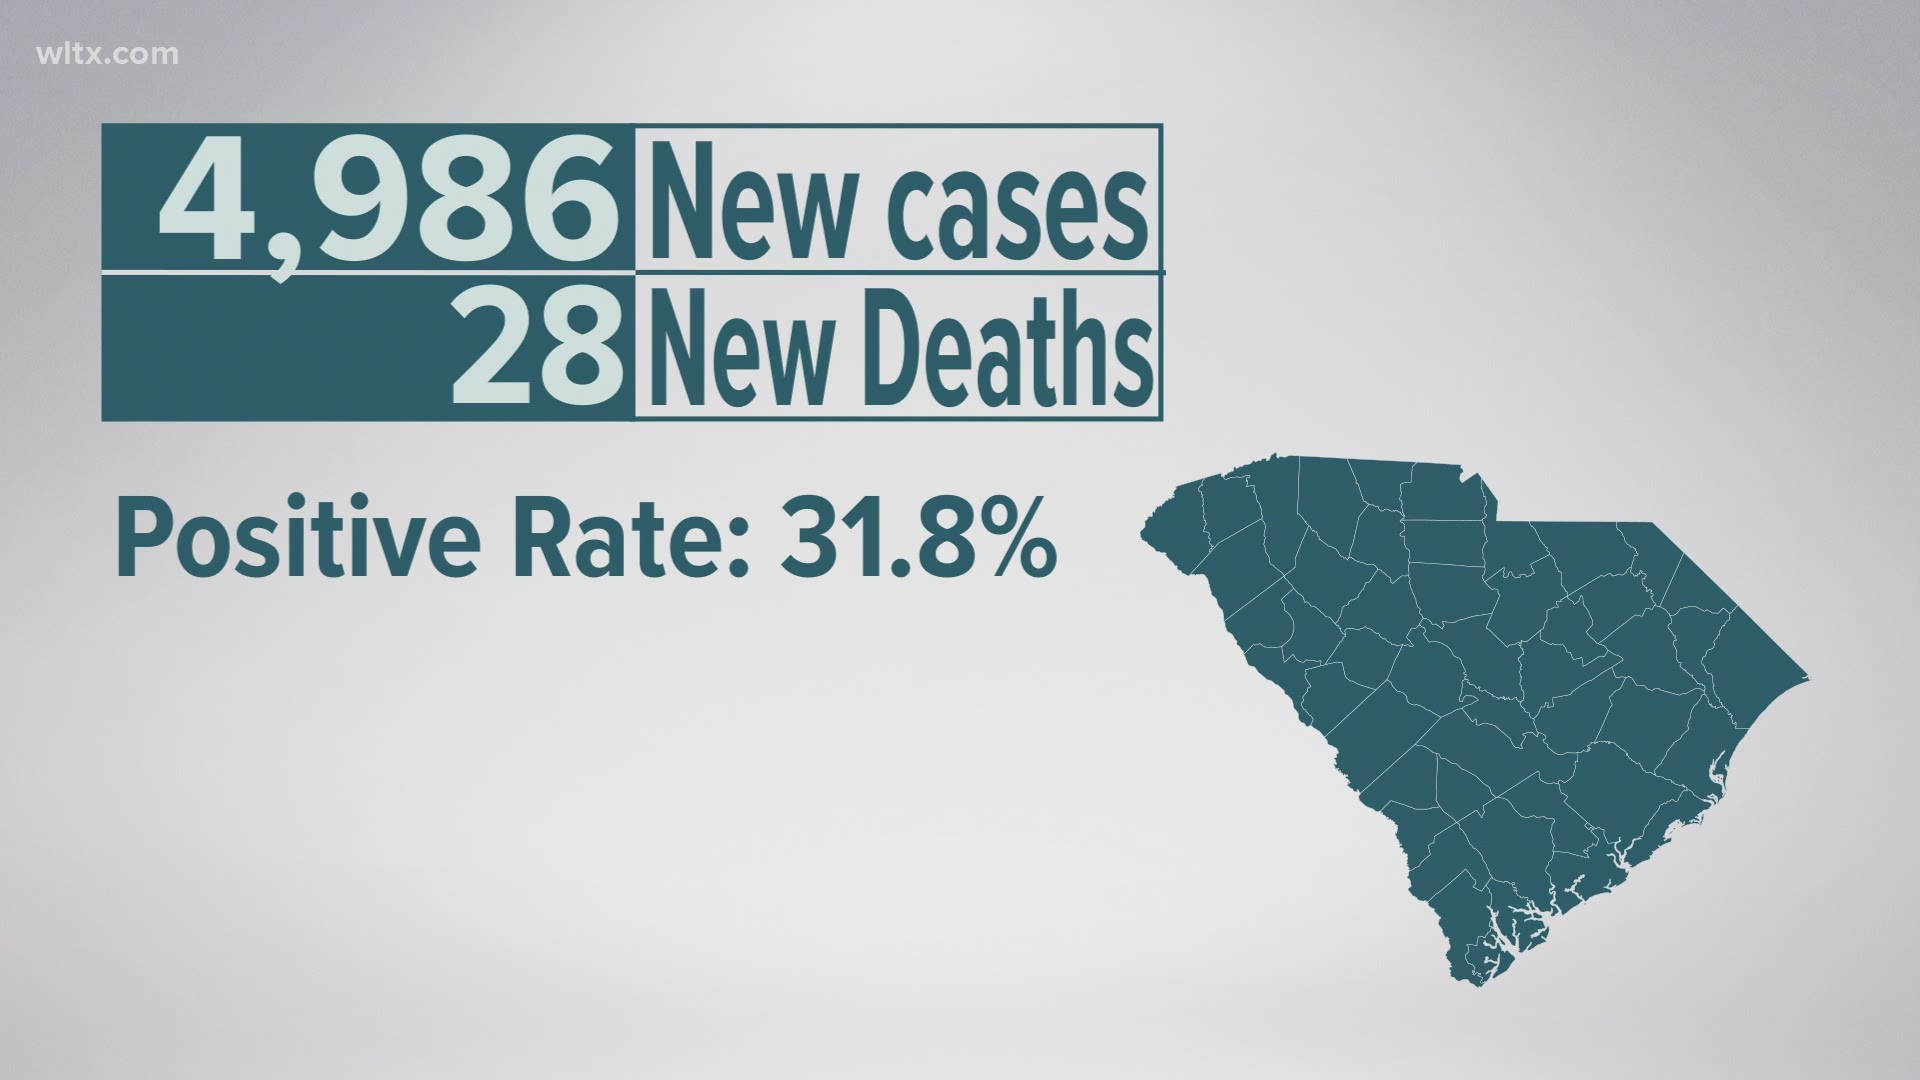 The state's health agency, DHEC, released their latest information Friday, showing nearly 5,000 new confirmed cases, an all-time record.